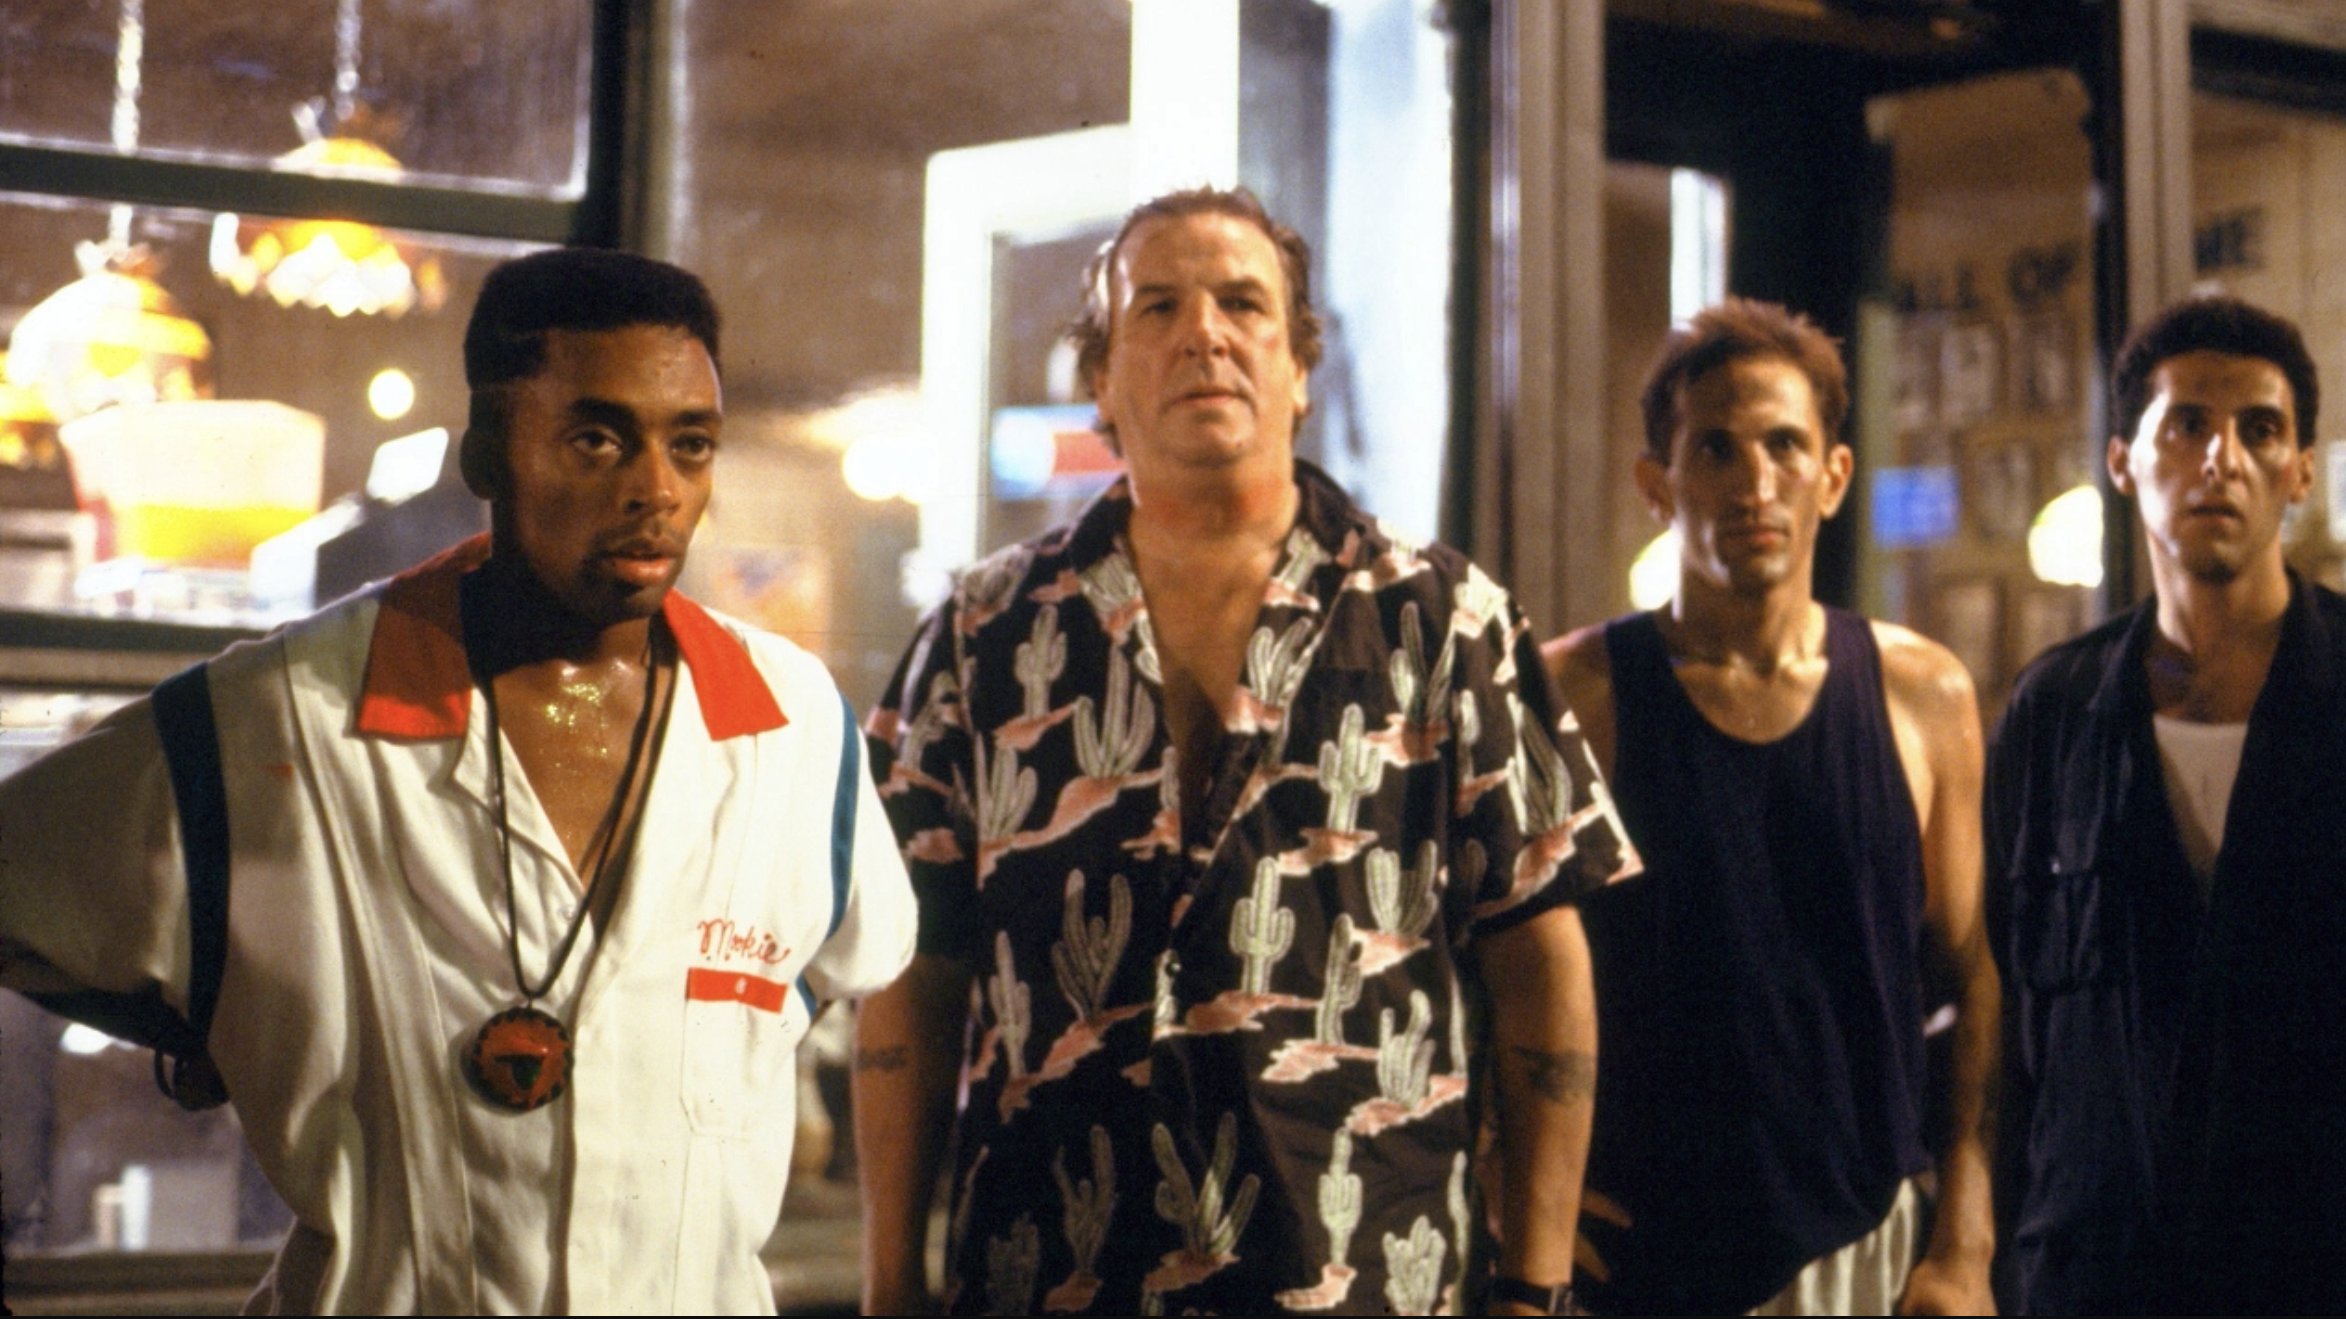 Best Spike Lee Movies - Do the Right thing